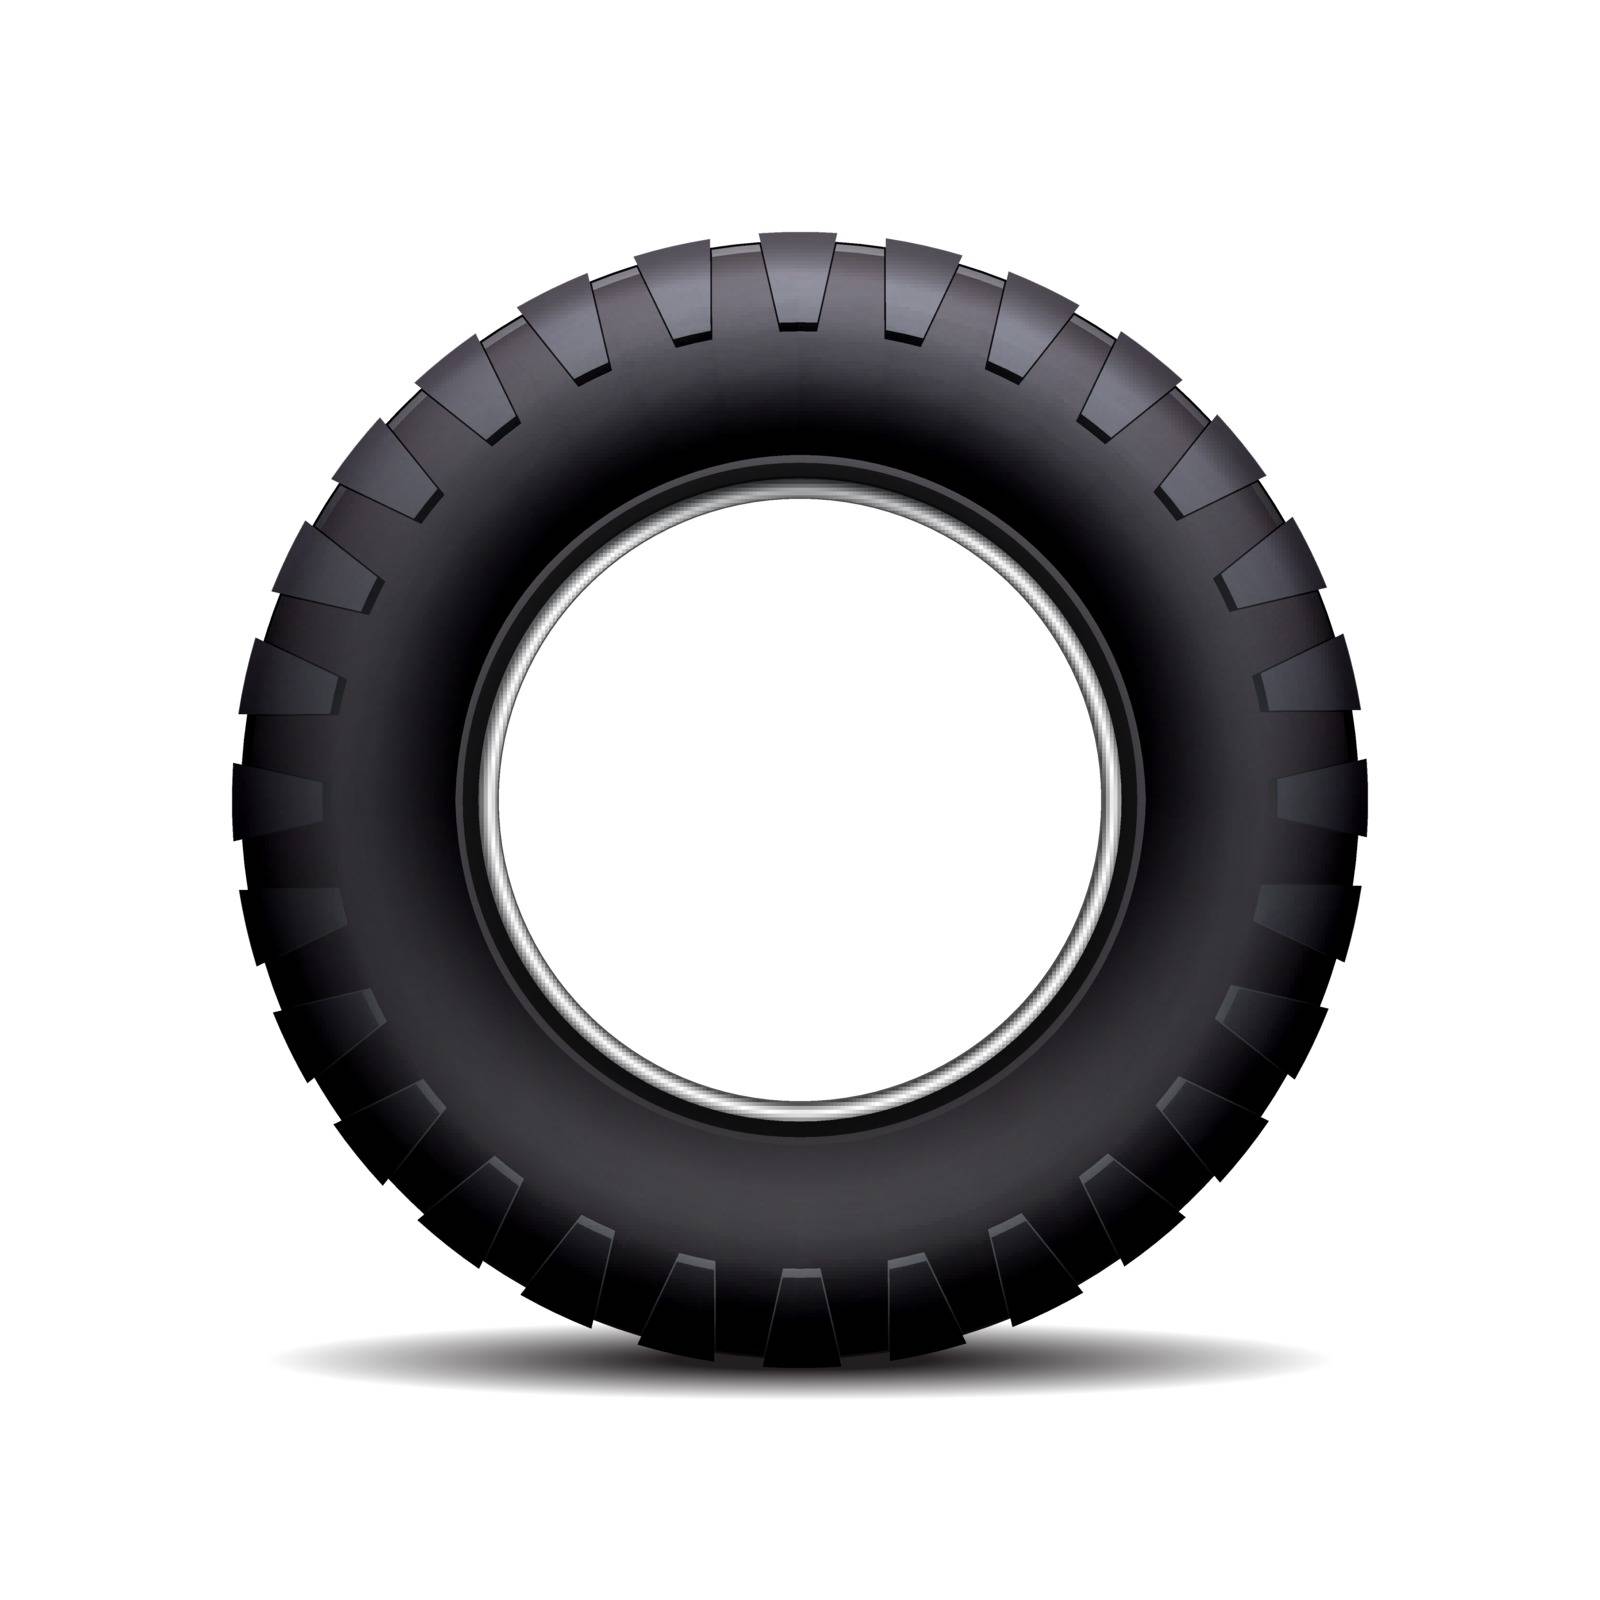 Car tire isolated on white background. by tassel78